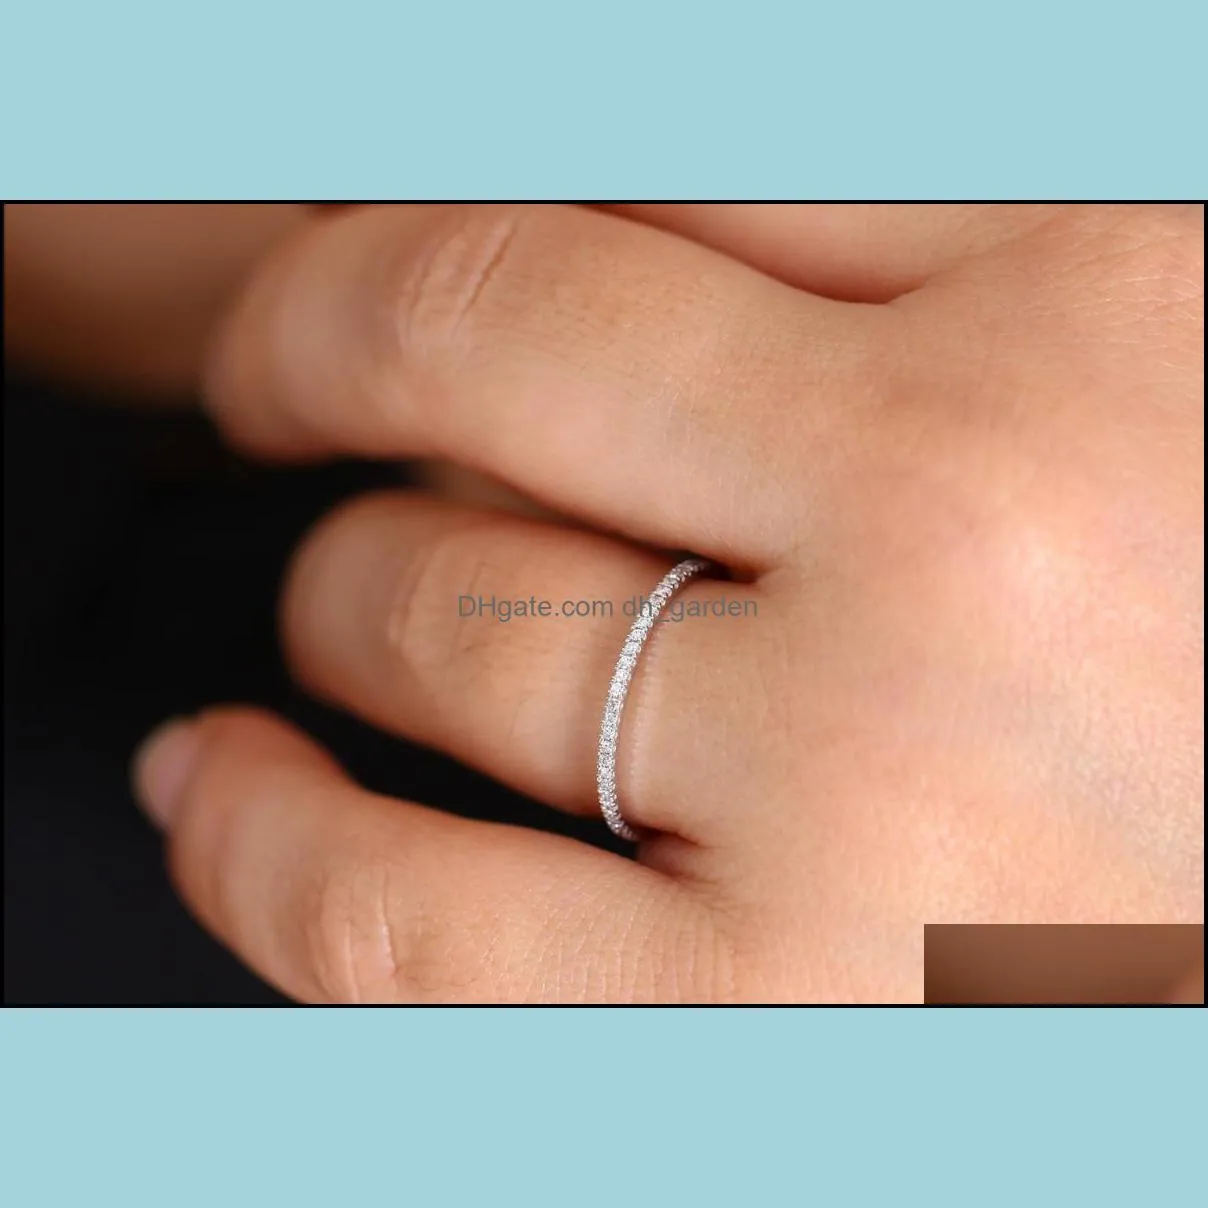 wedding rings ring stone stackable promise jewellery thin cute crystals size 5 11 drop toe silver jewlerywedding brit22